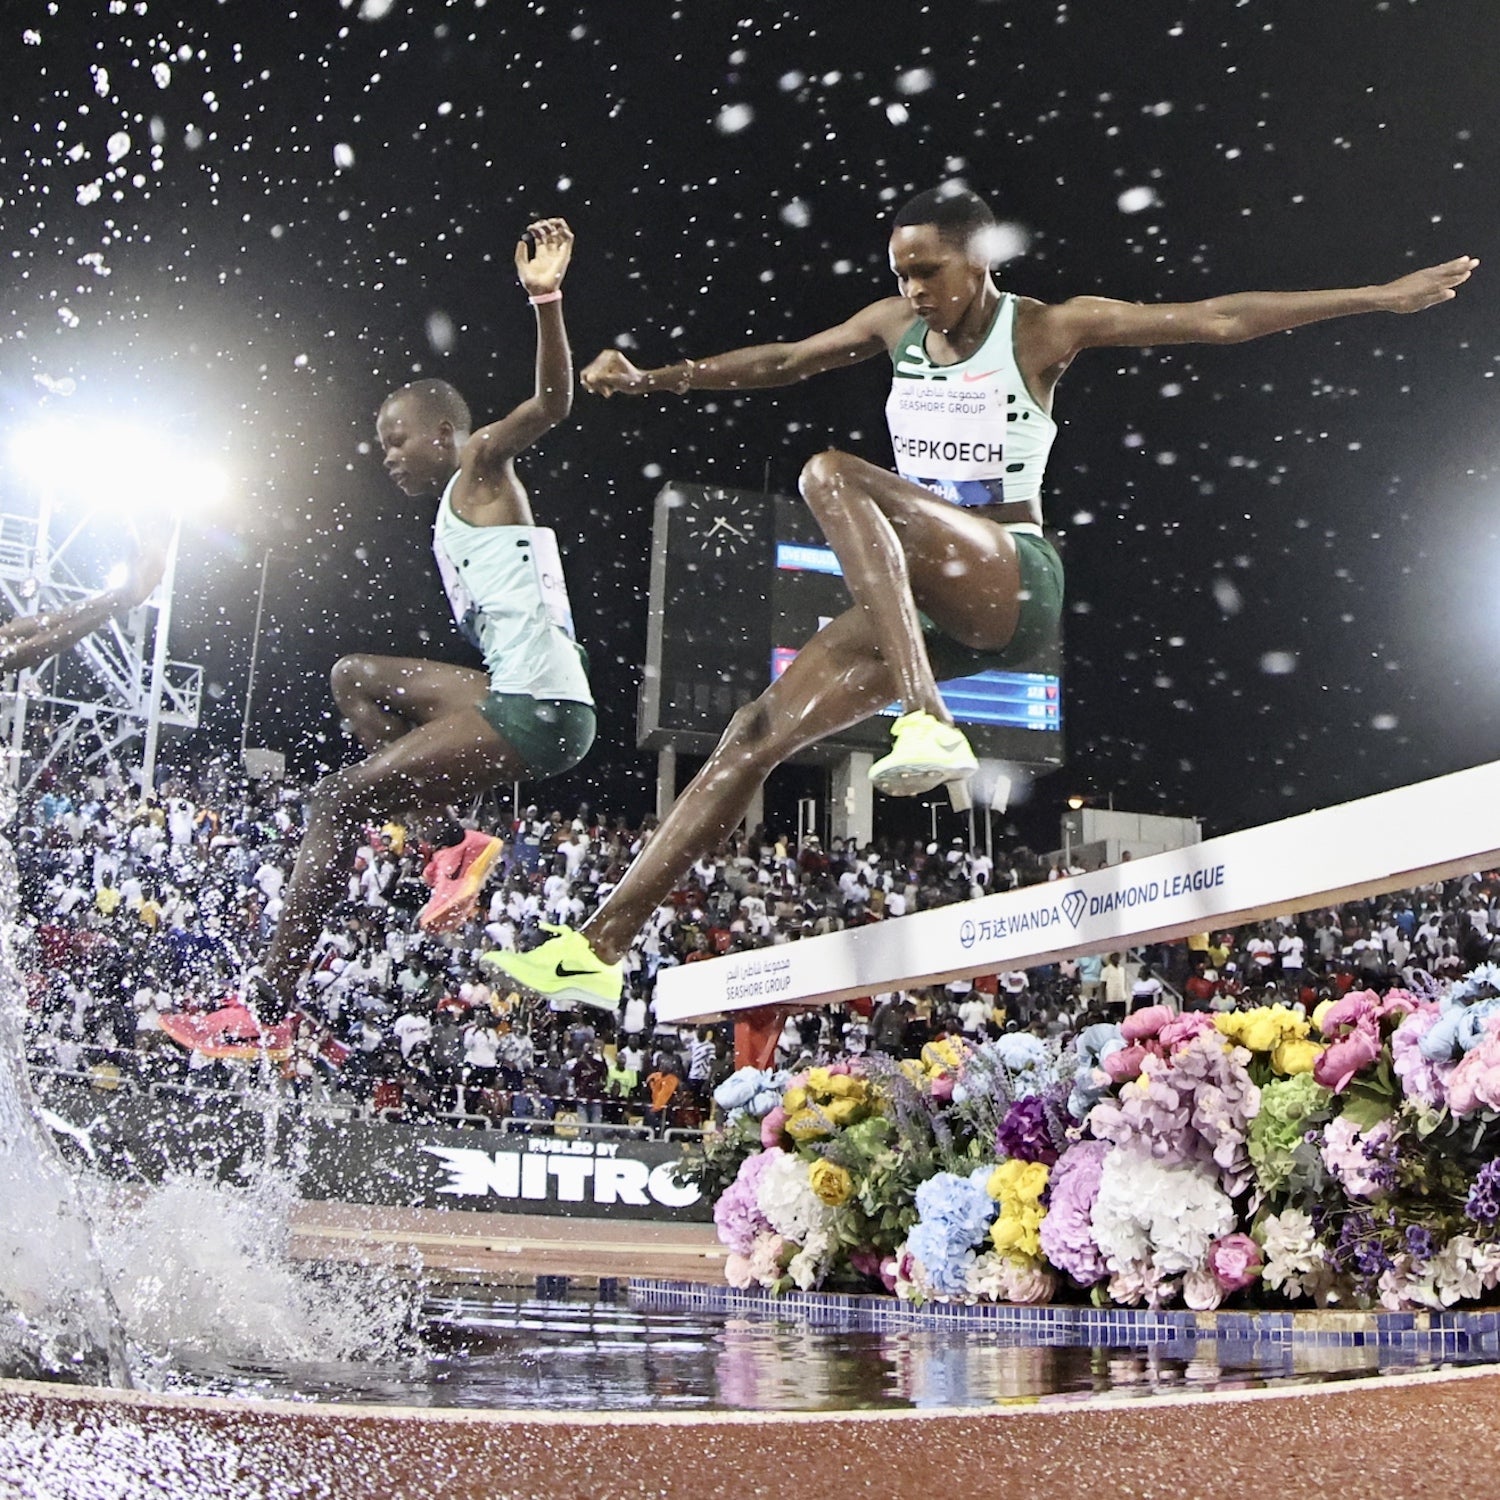 Remembering the top moments of a 'sensational' Track and Field